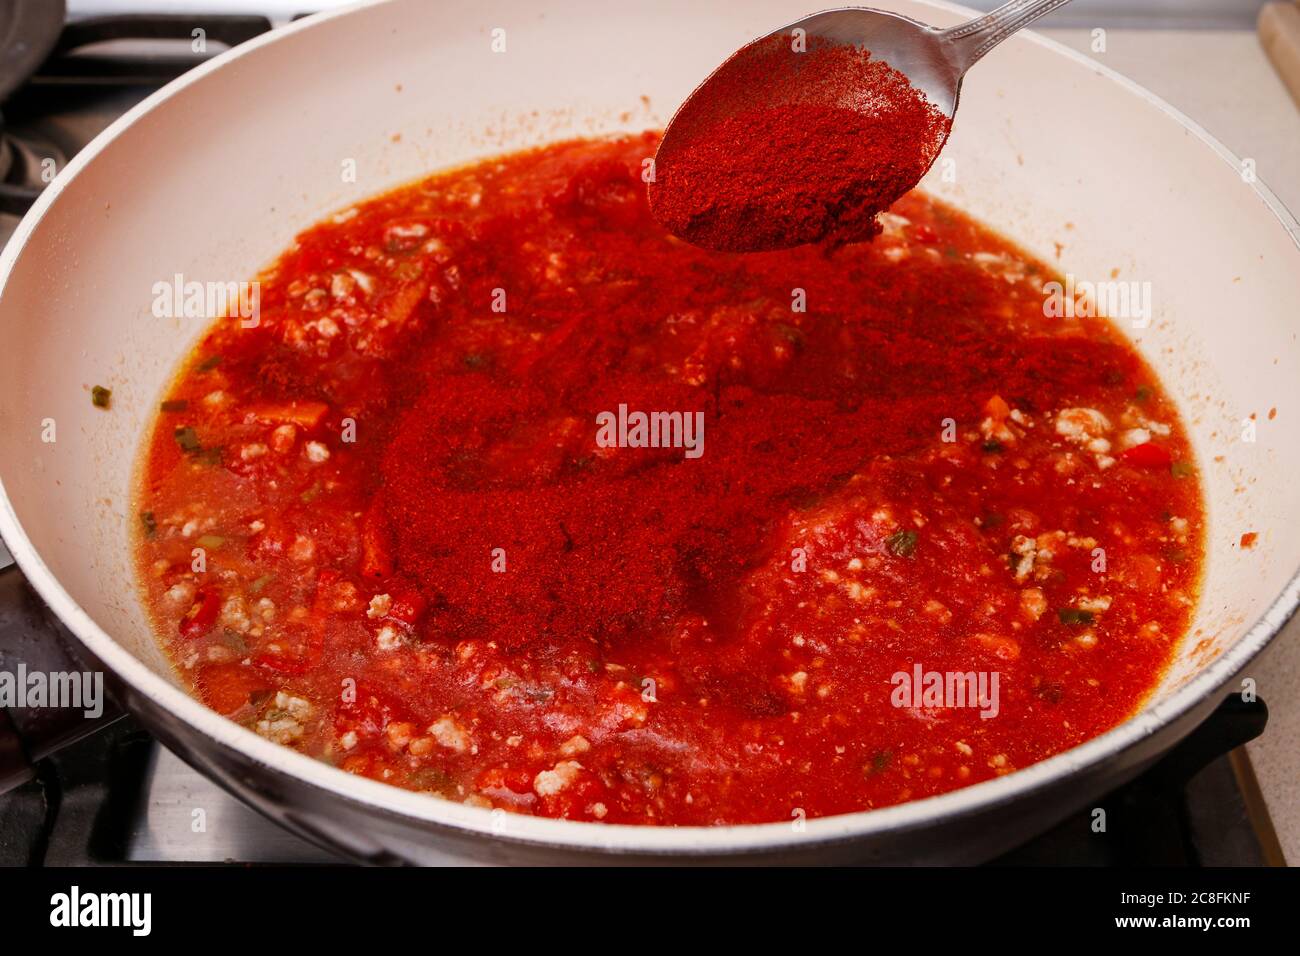 Chef at work: How to make Bolognese sauce for pasta. Step by step tutorial. Stock Photo